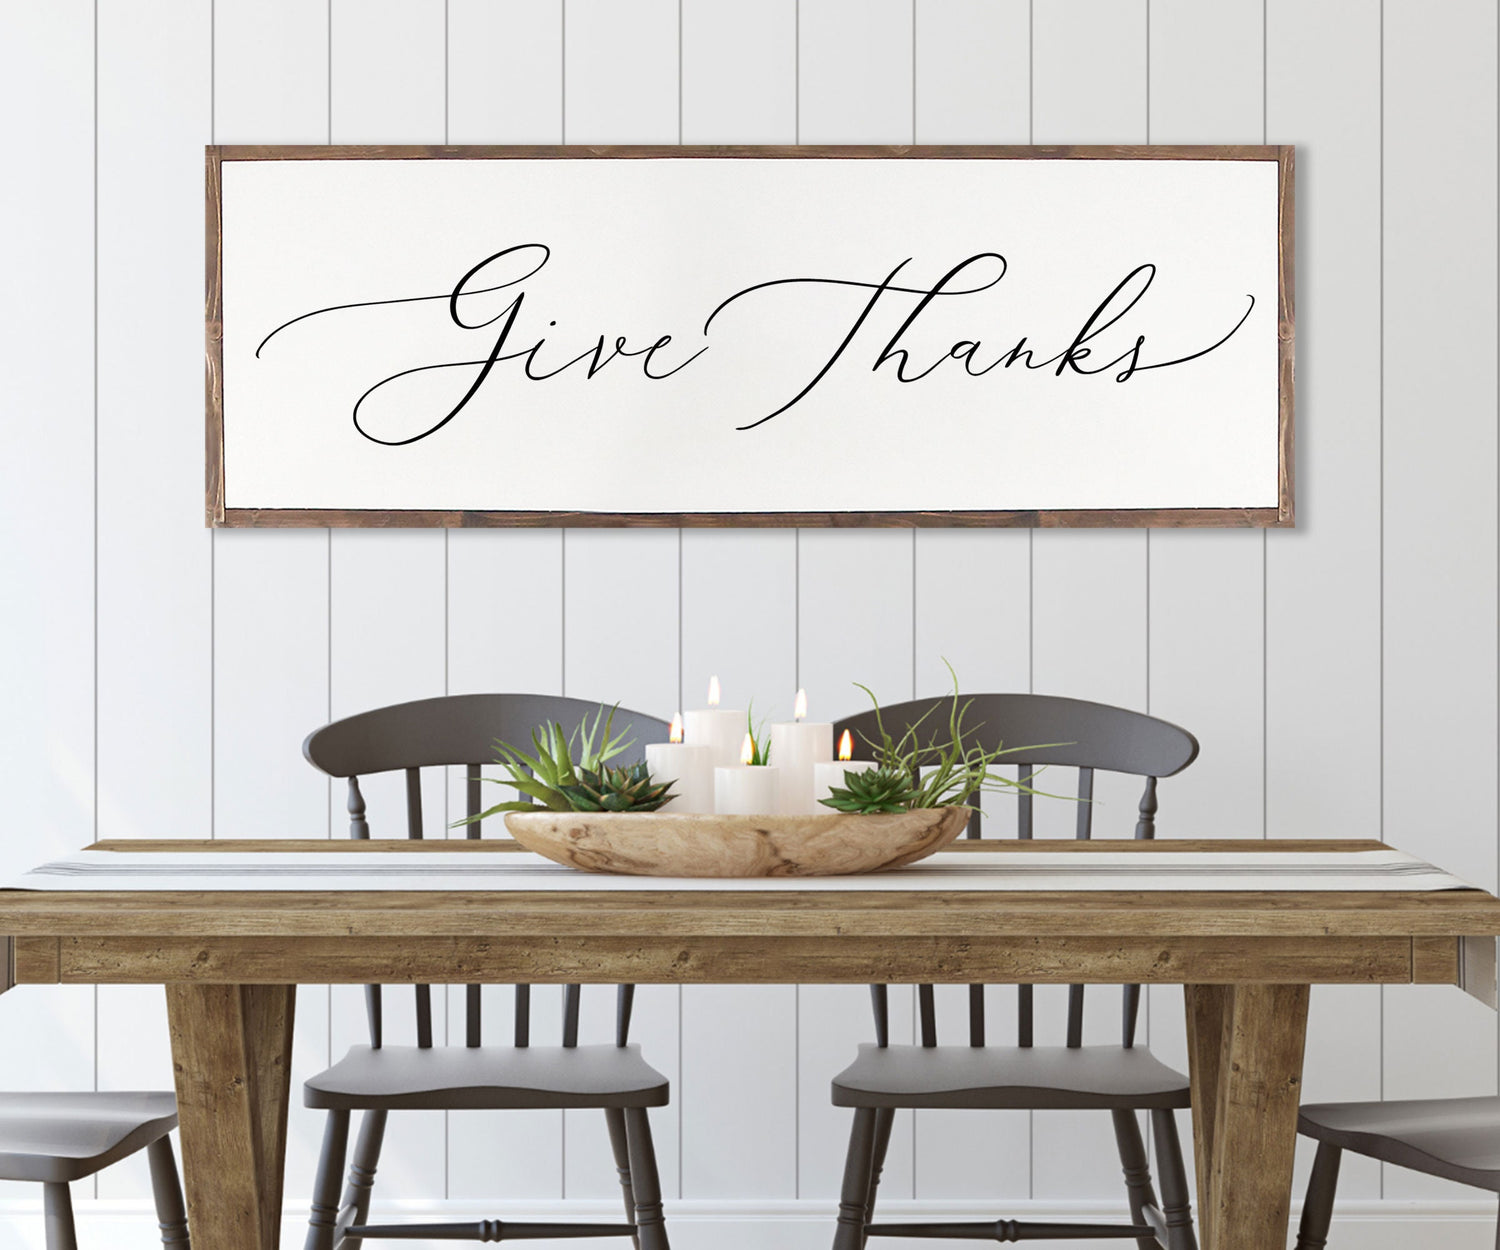 GIVE THANKS FARMHOUSE |  Give Thanks sign // large thanksgiving sign // dining room sign // framed gather sign | wood sign | Give Thanks